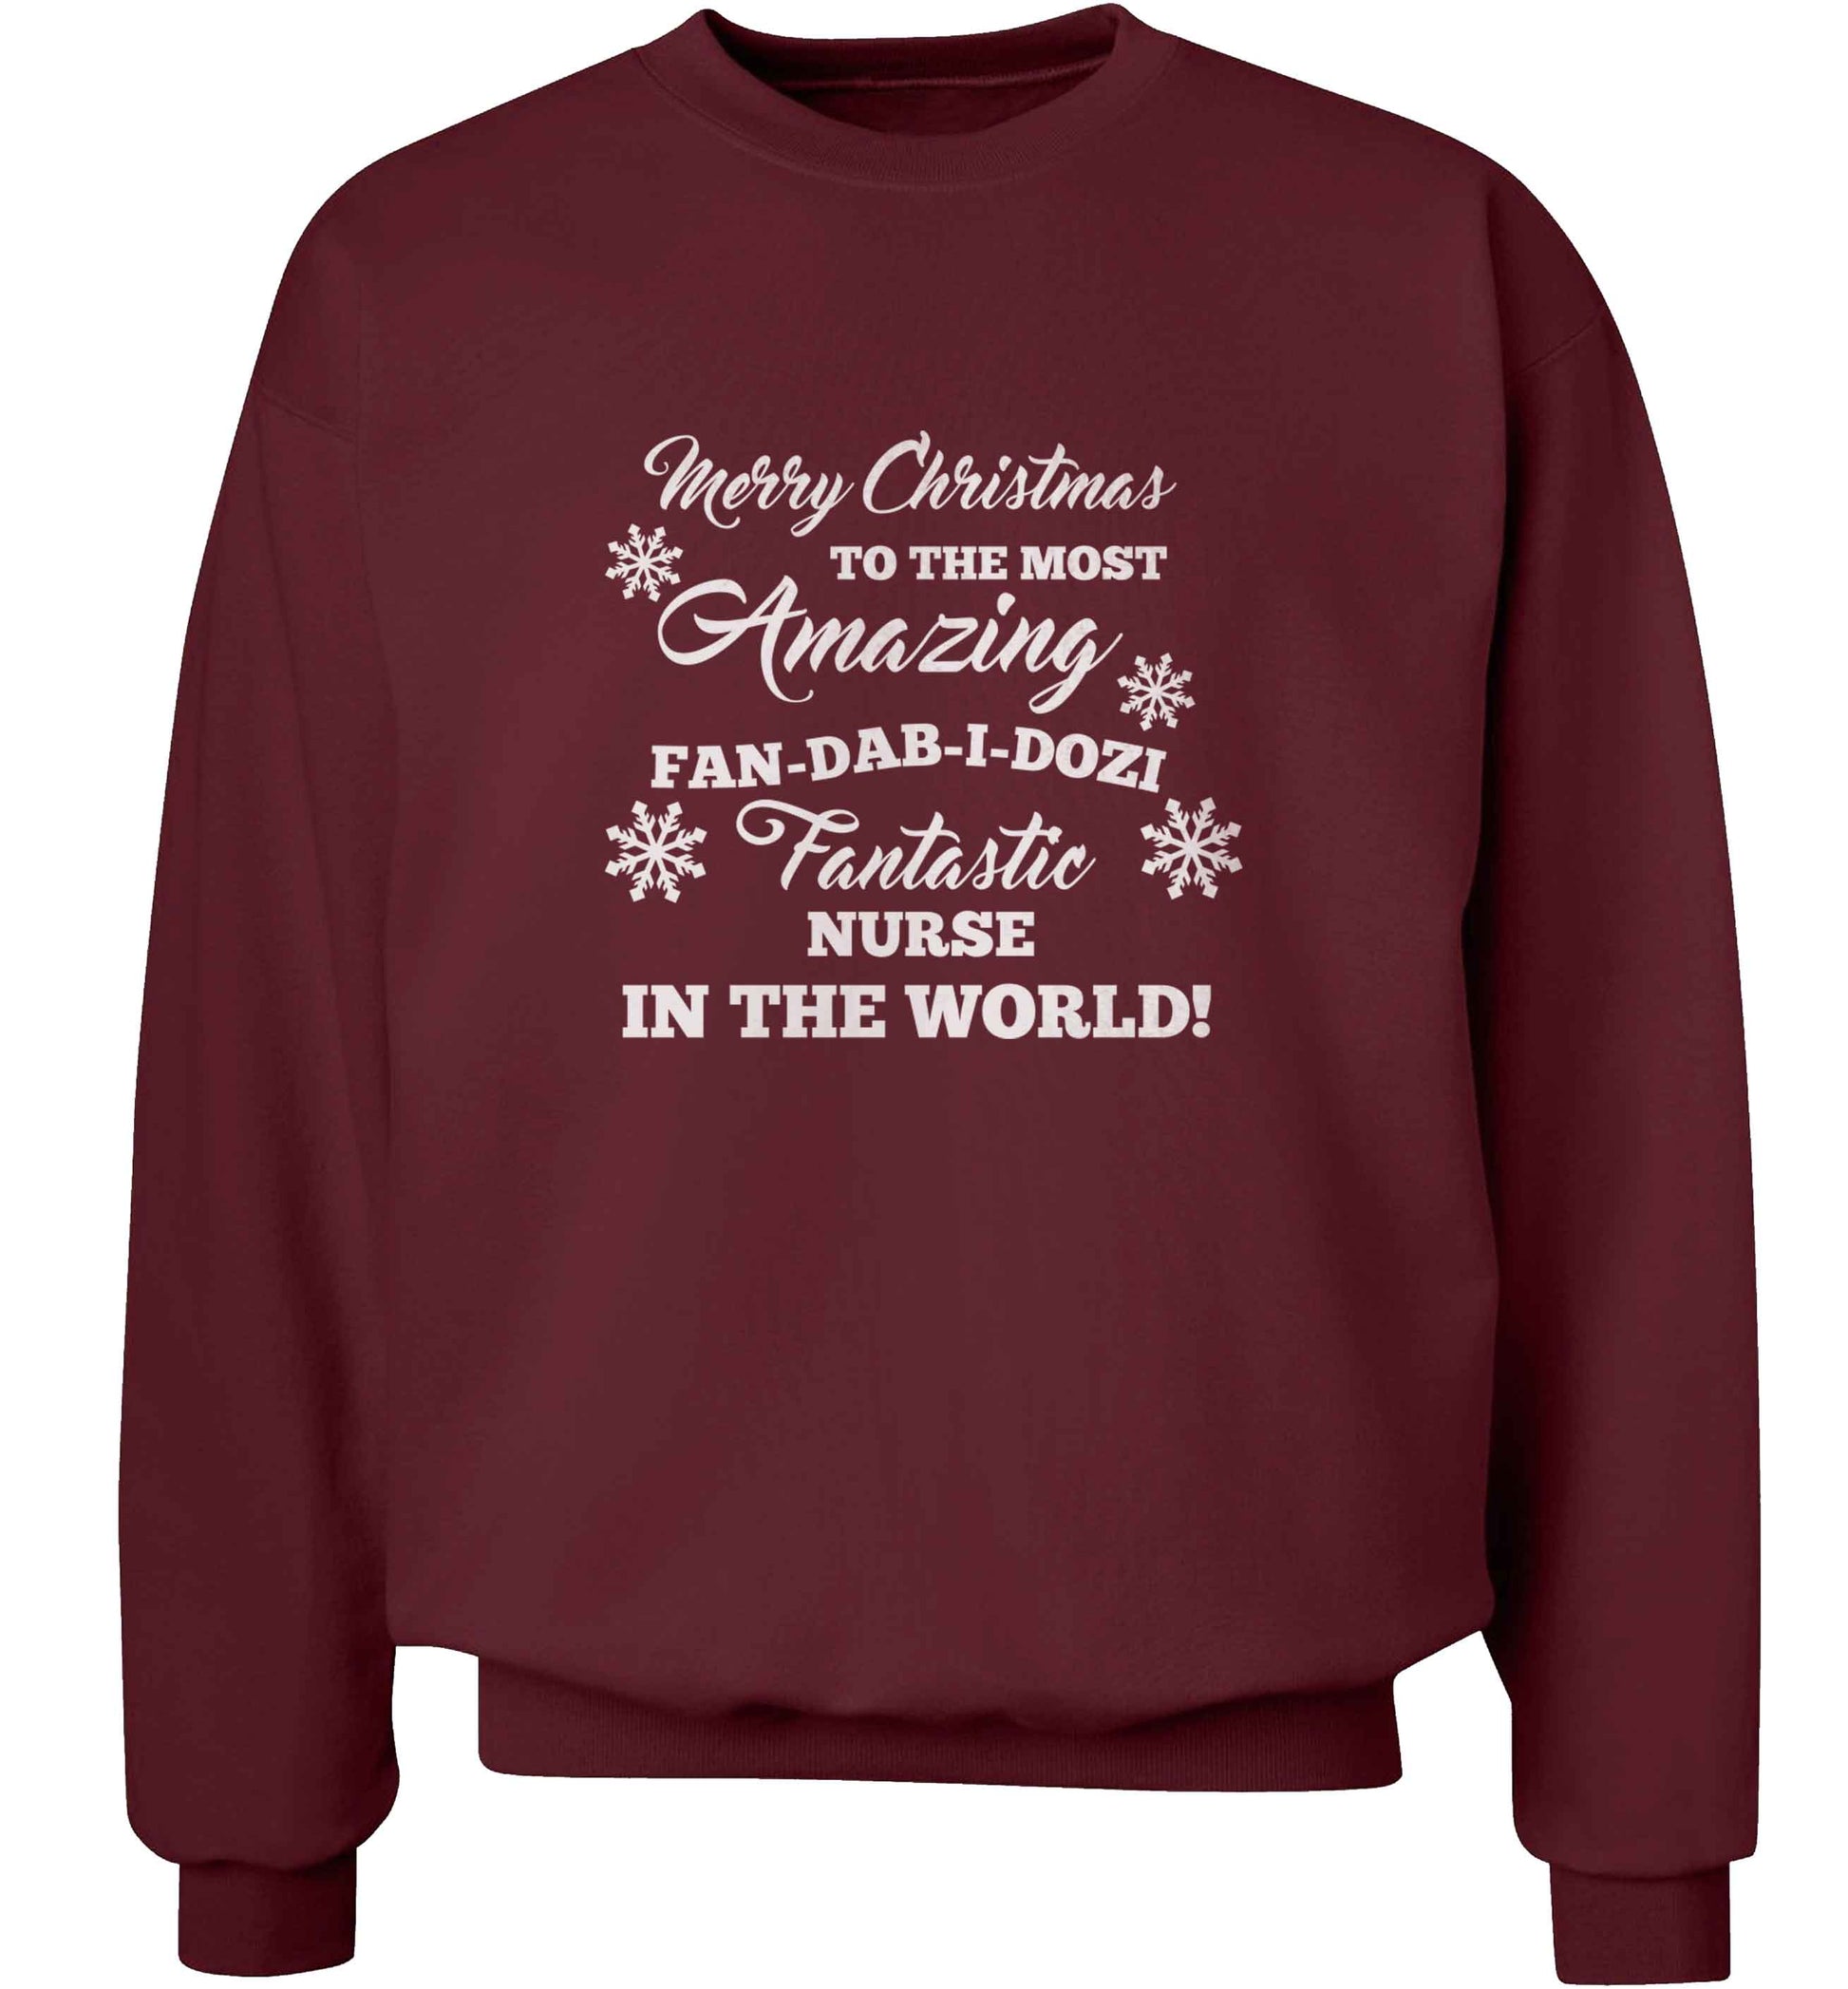 Merry Christmas to the most amazing nurse in the world! adult's unisex maroon sweater 2XL